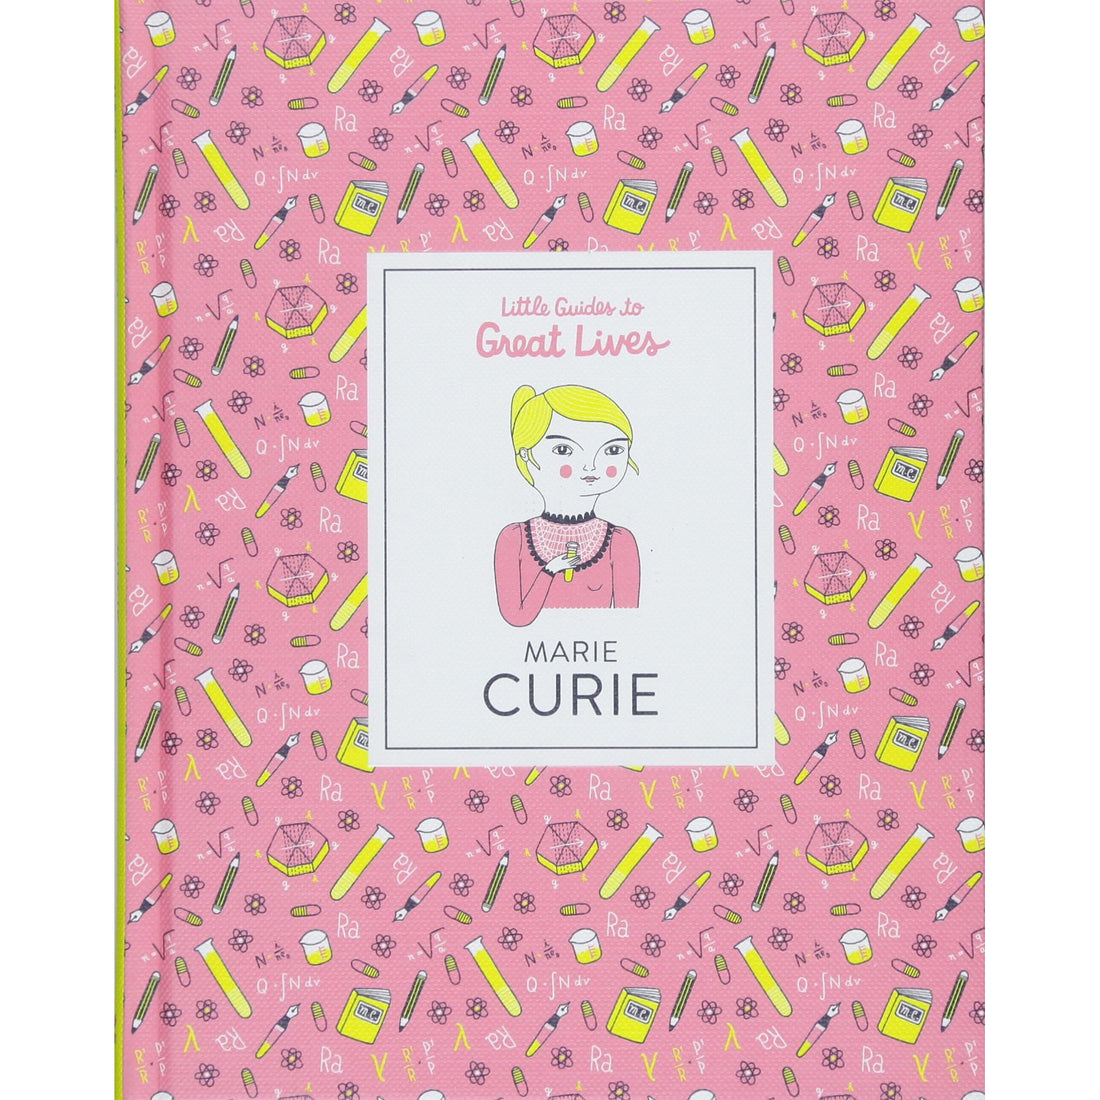 marie-curie-little-guides-to-great-lives-(1)